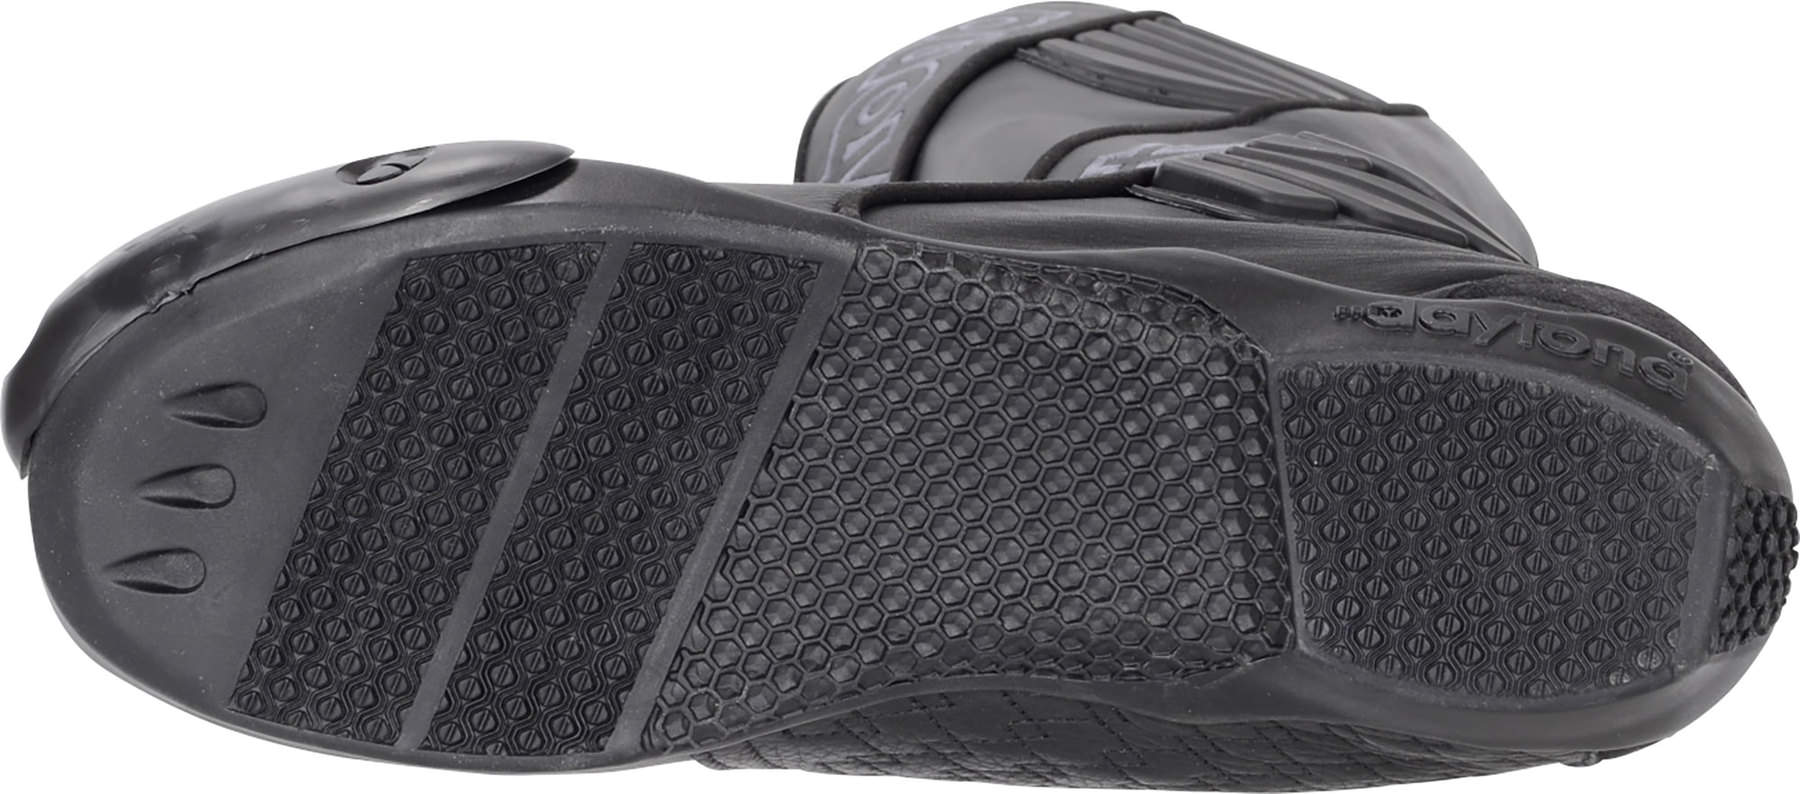 Buy Daytona security evo G3 boots | Louis motorcycle clothing and ...